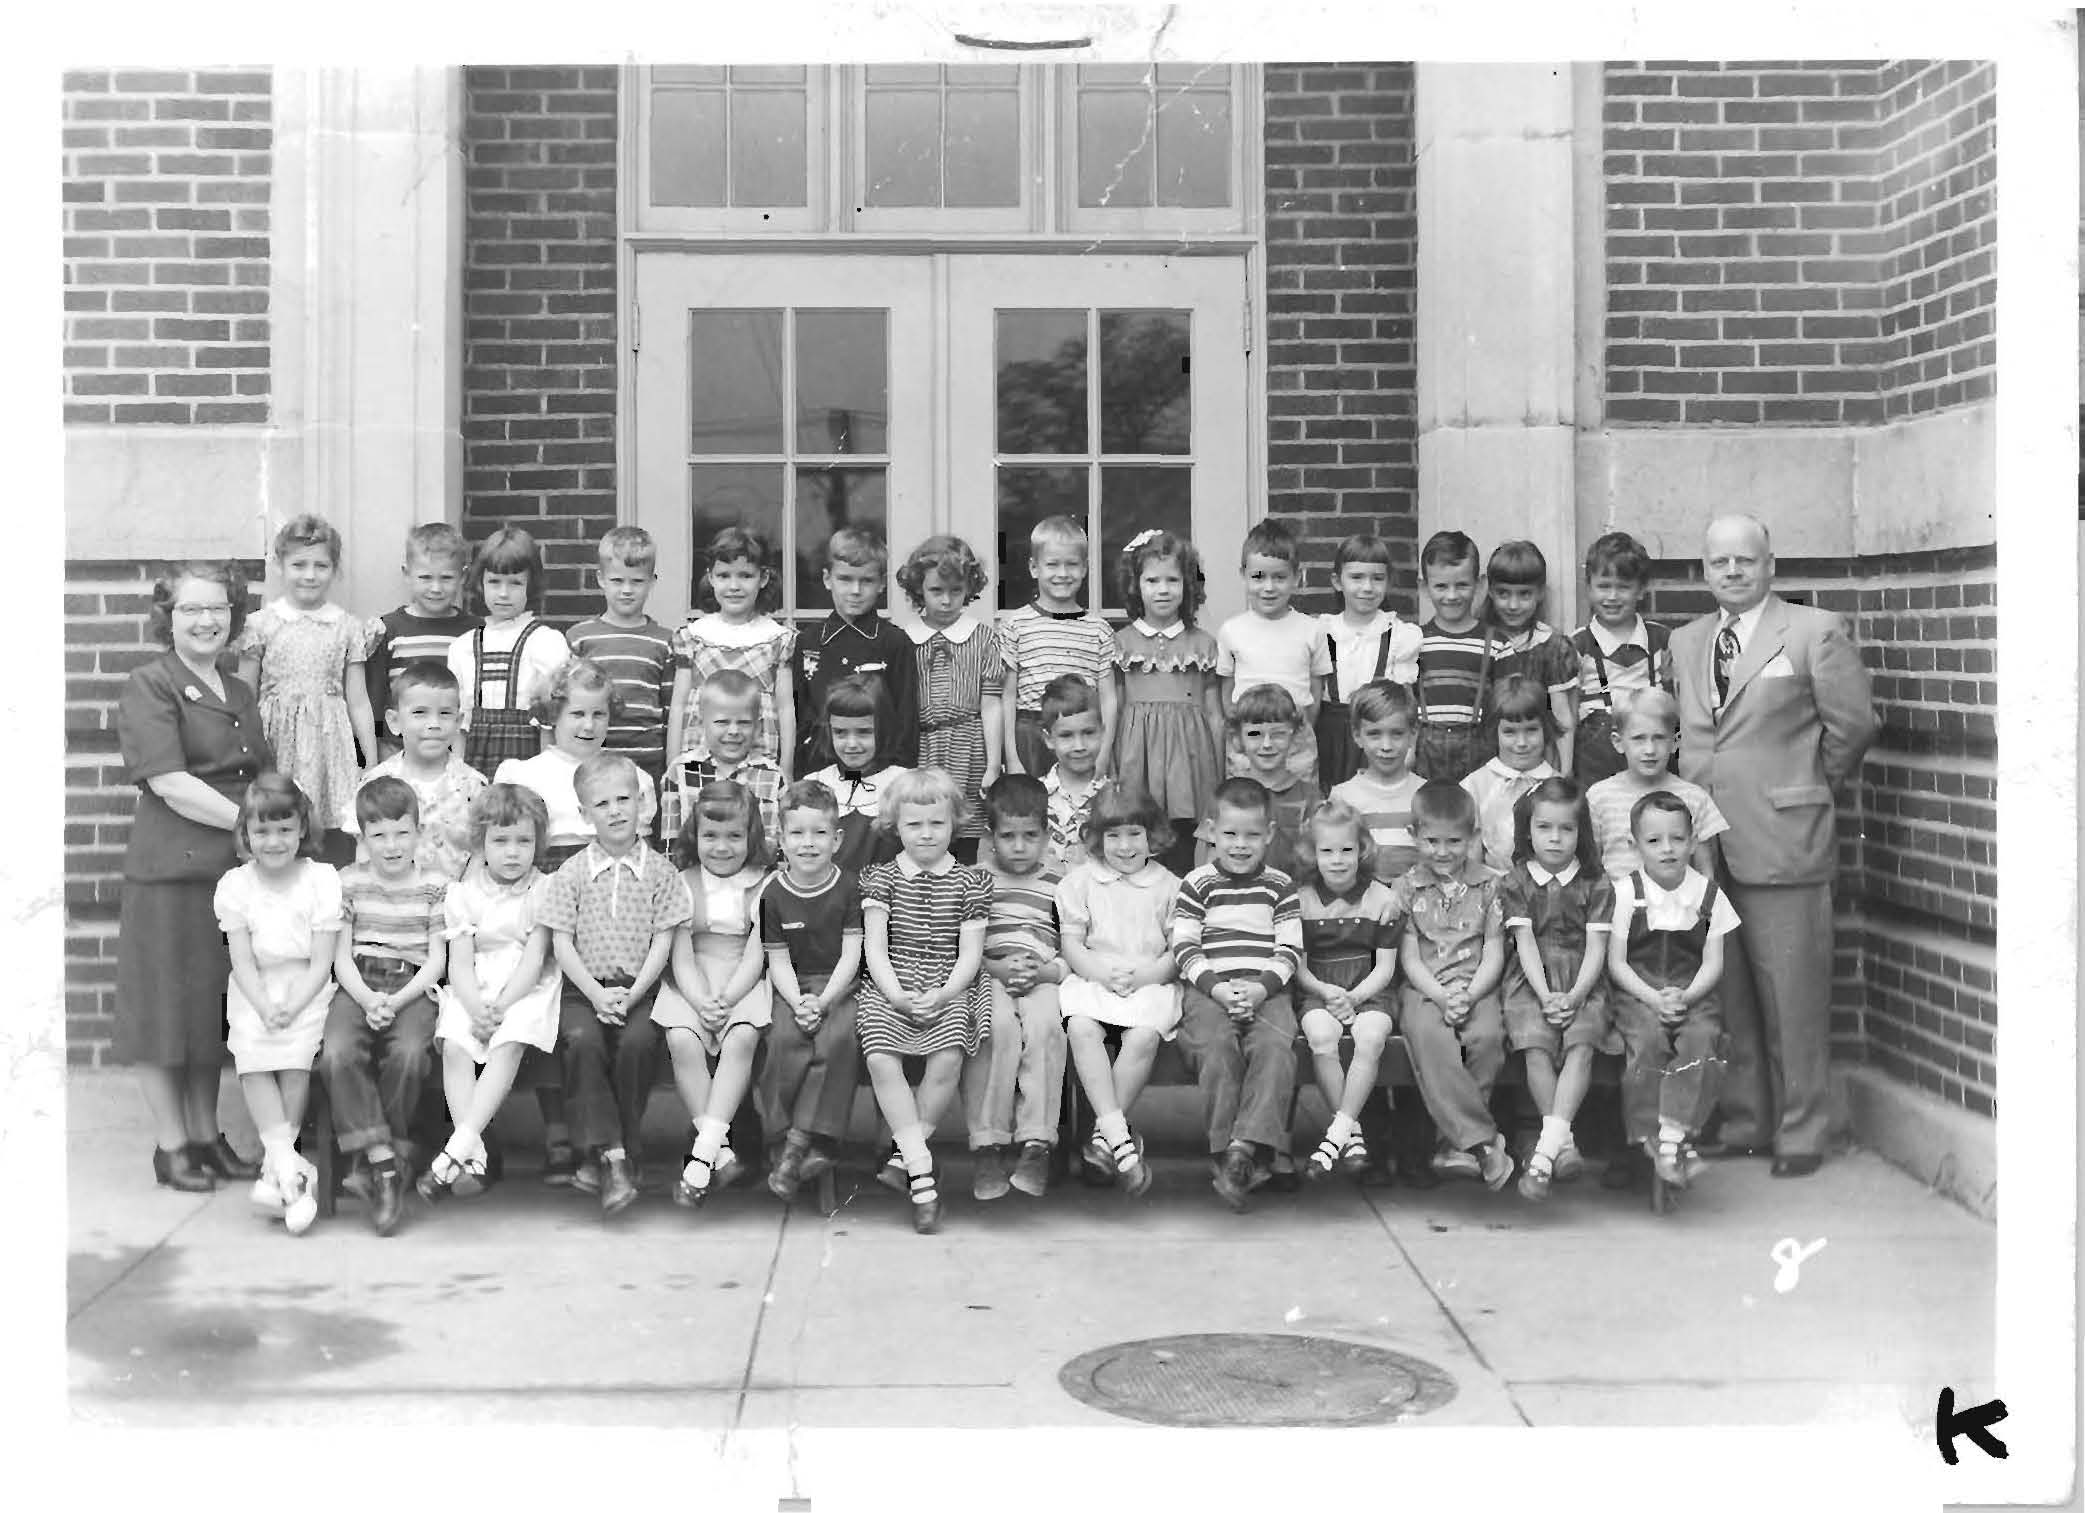 Fairview Elementary Kindergarten 1952-53 class photo, submitted by Dan Wolfe FHS Class of '65